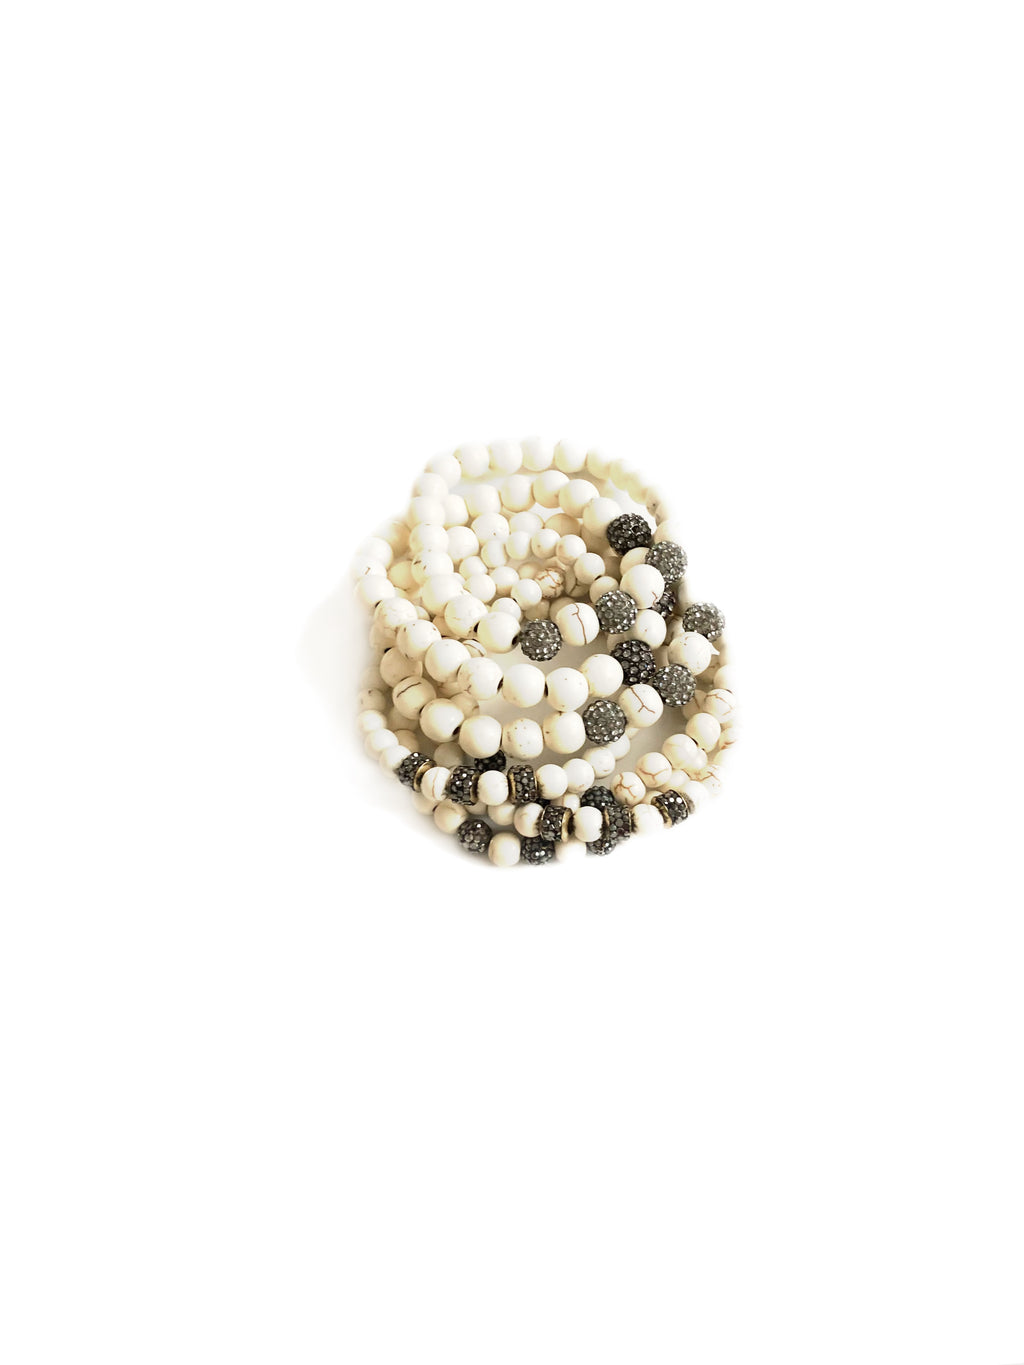 White Turqouise 8mm Beads and Pave Ball Bracelet